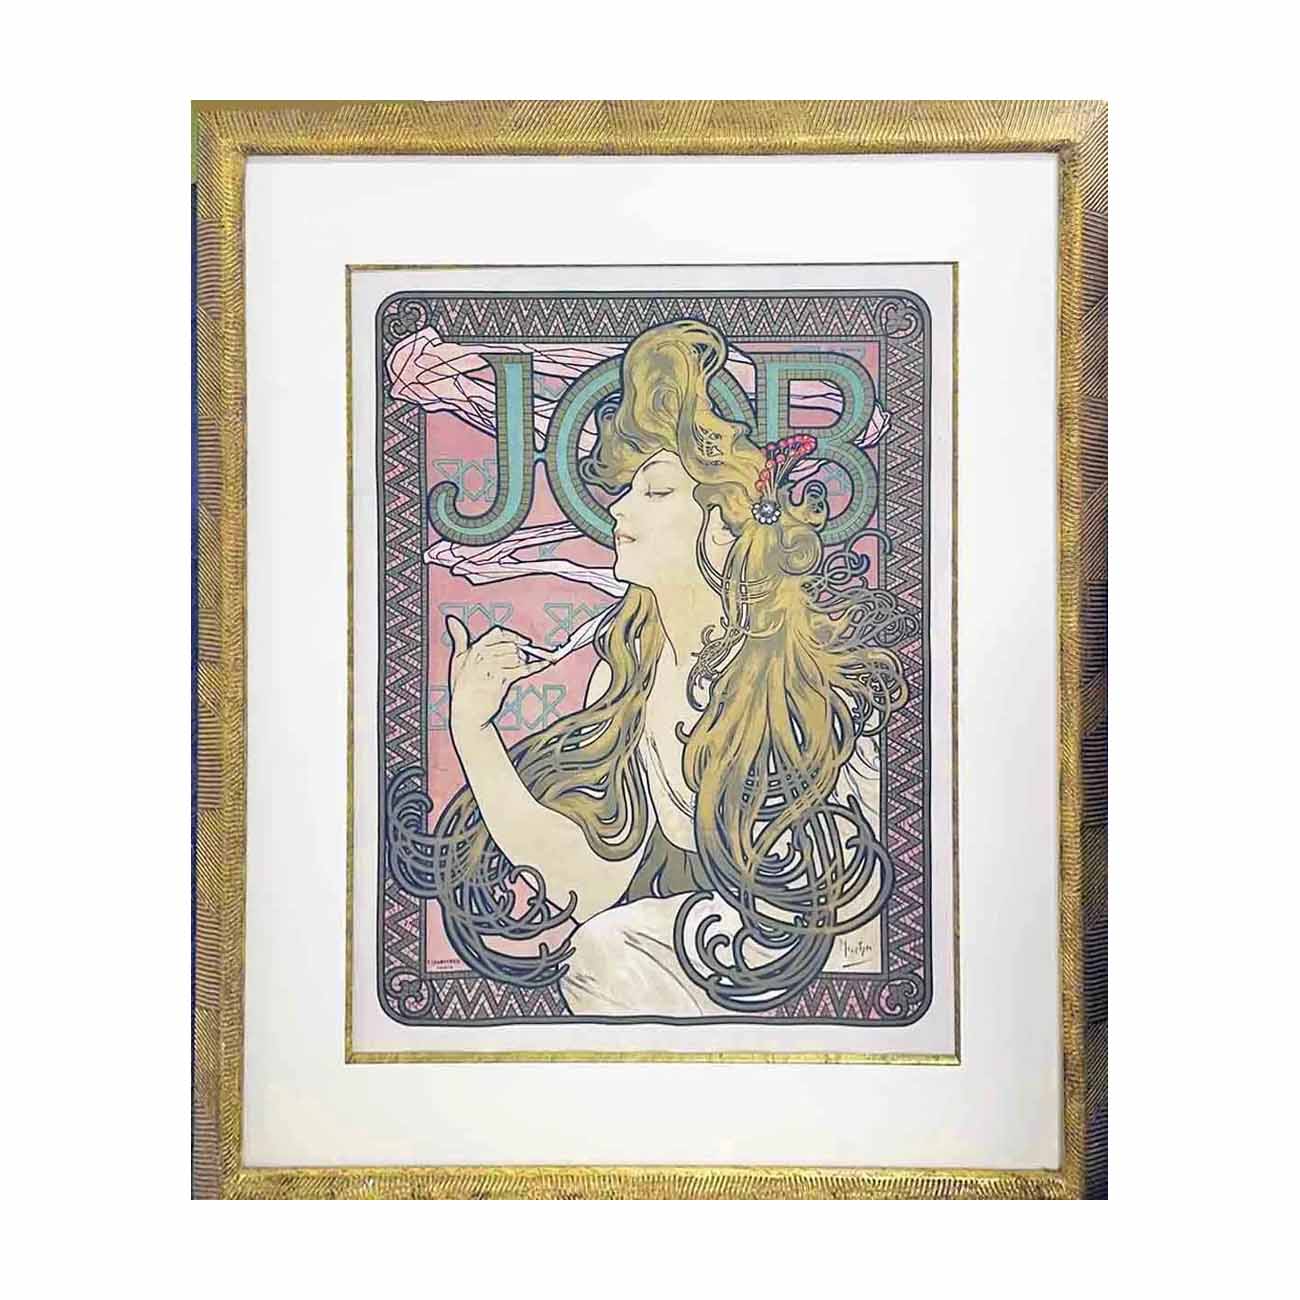 Alphonse Mucha Job Cigarette Papers Poster, estimated at $3,000-$5,000 at Stephenson's.